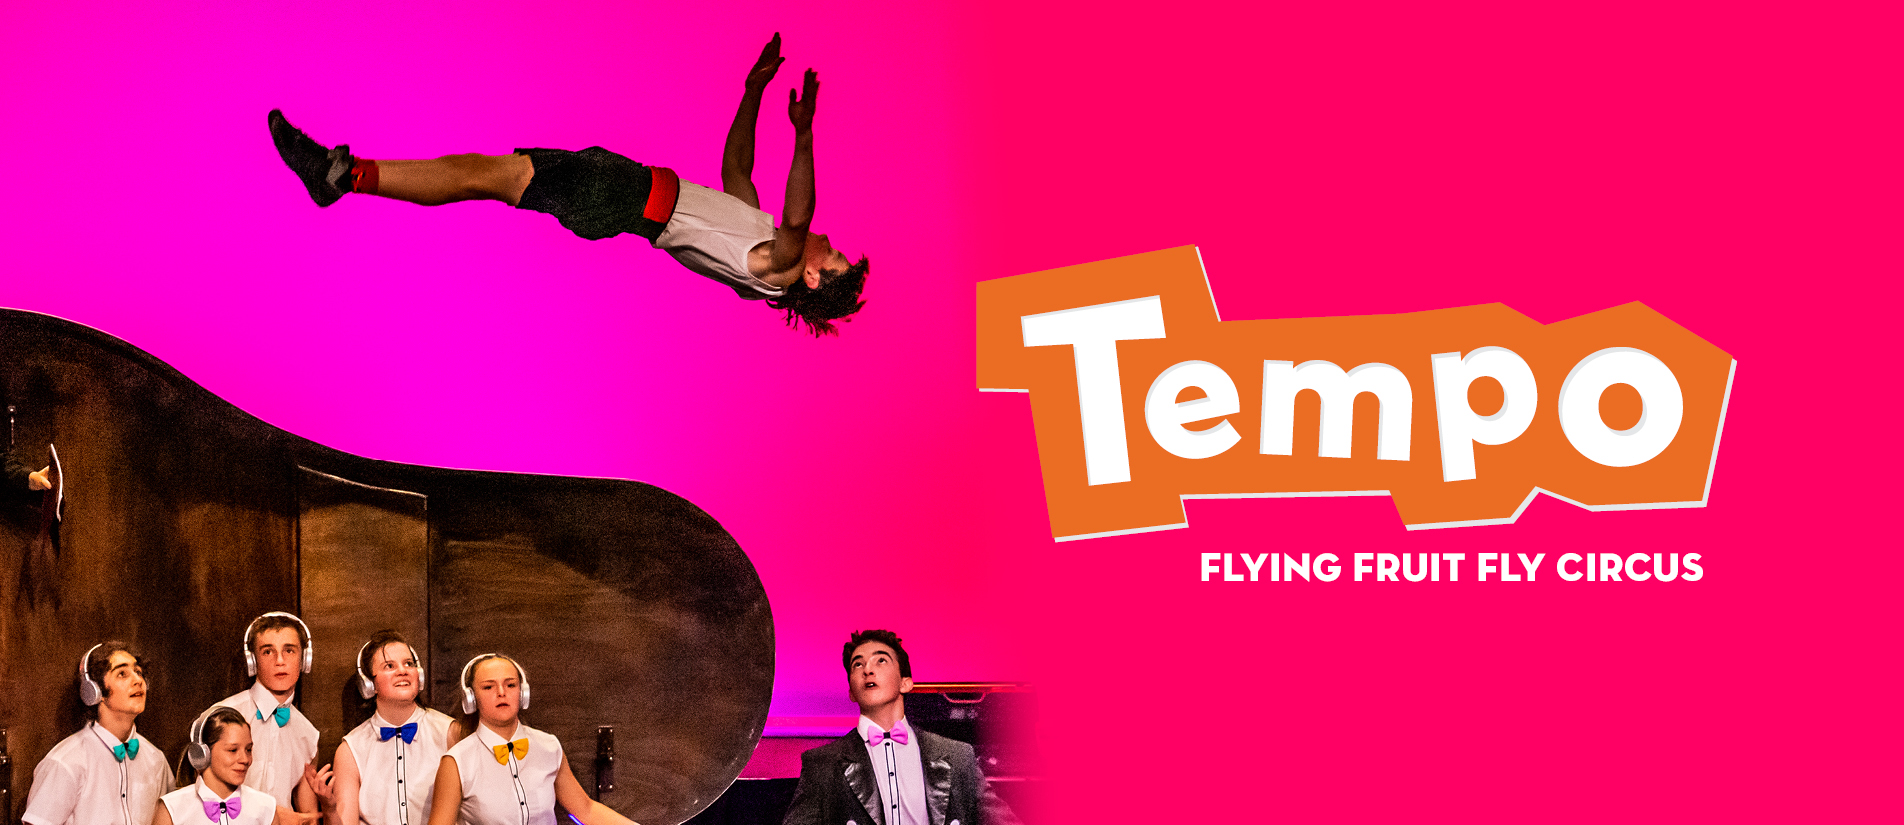 Tempo by Flying Fruit Fly Circus